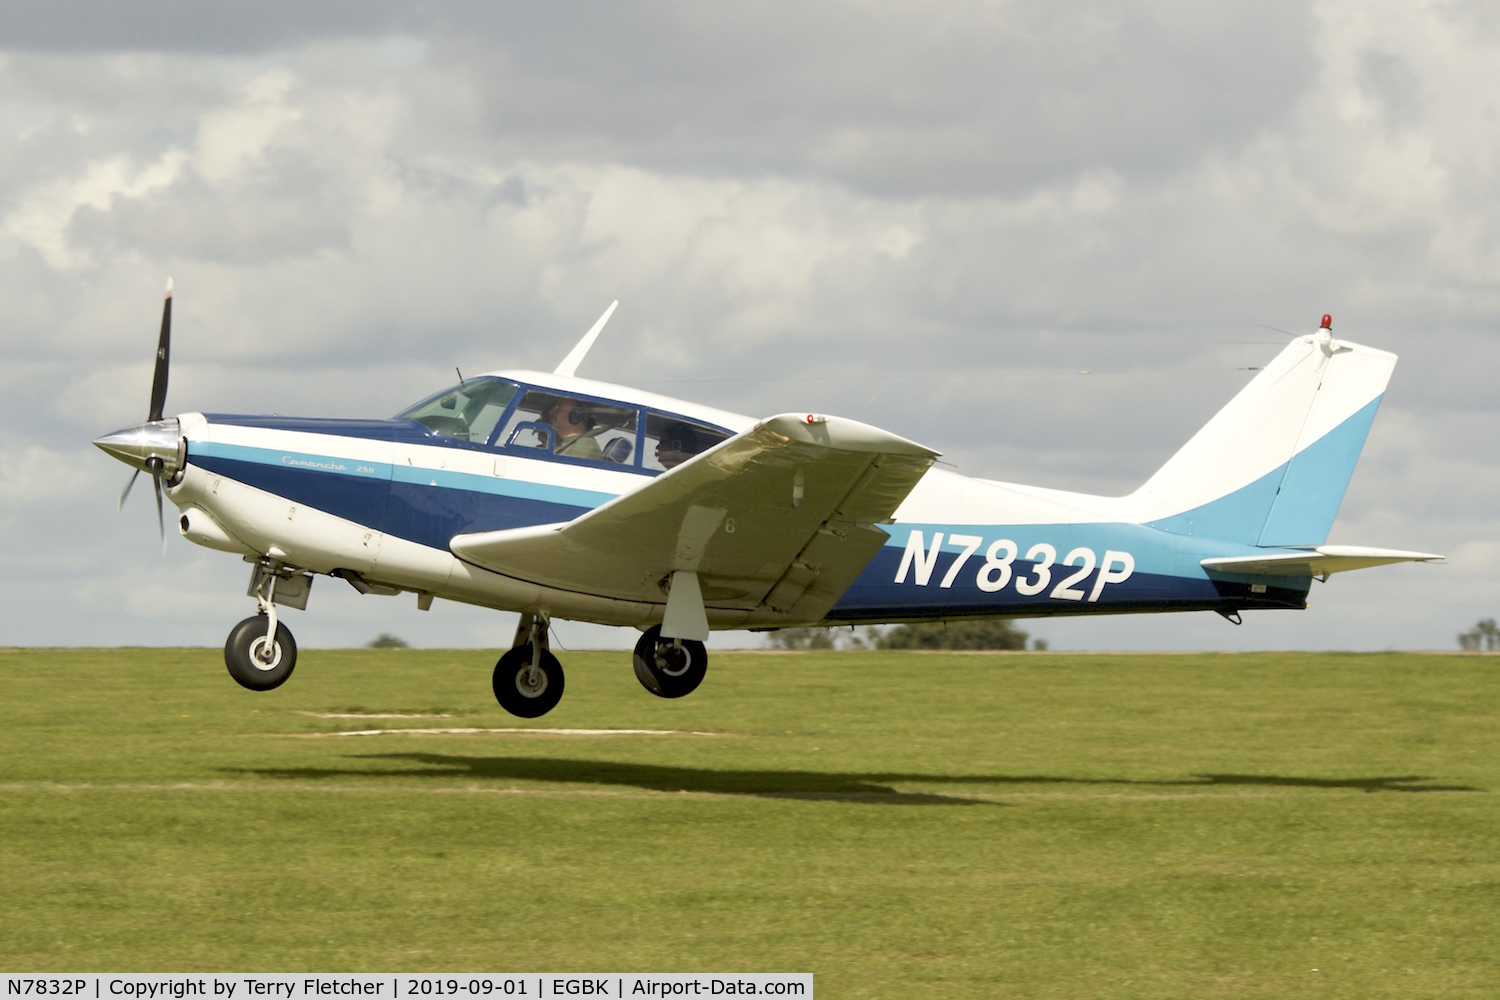 N7832P, 1962 Piper PA-24-250 Comanche C/N 24-3052, At Sywell